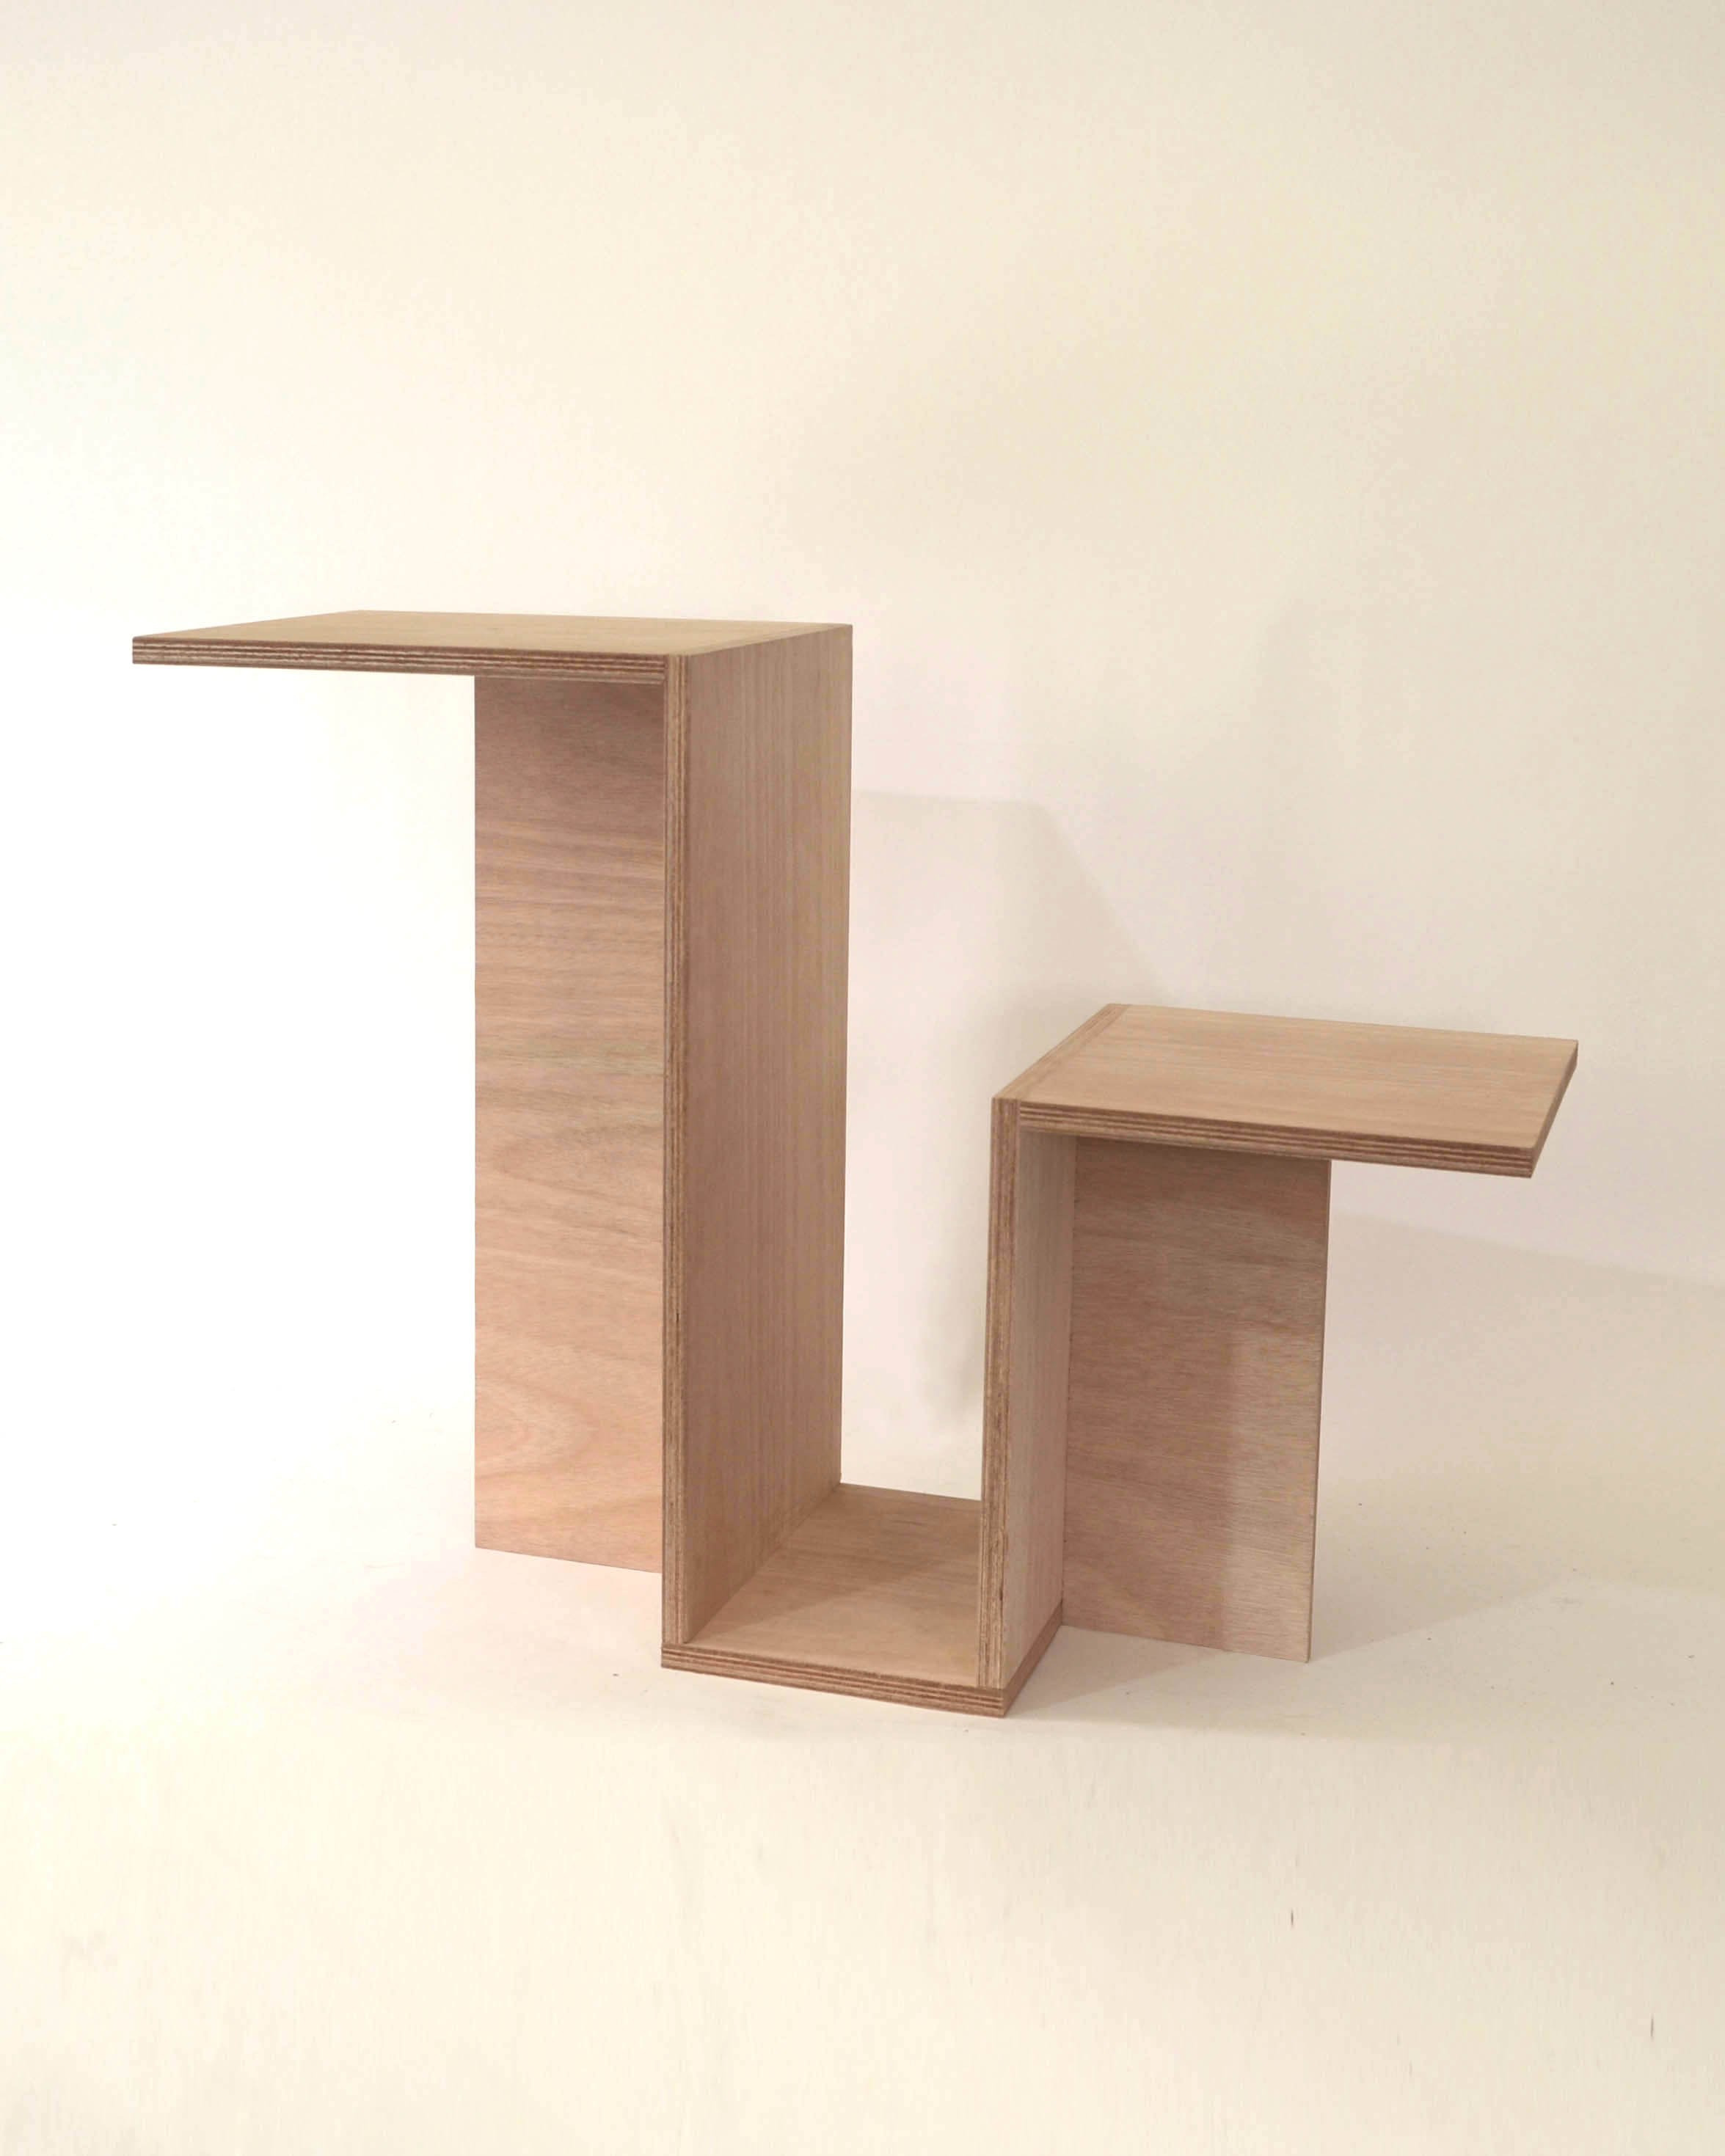 image of a student's design build, table and bench